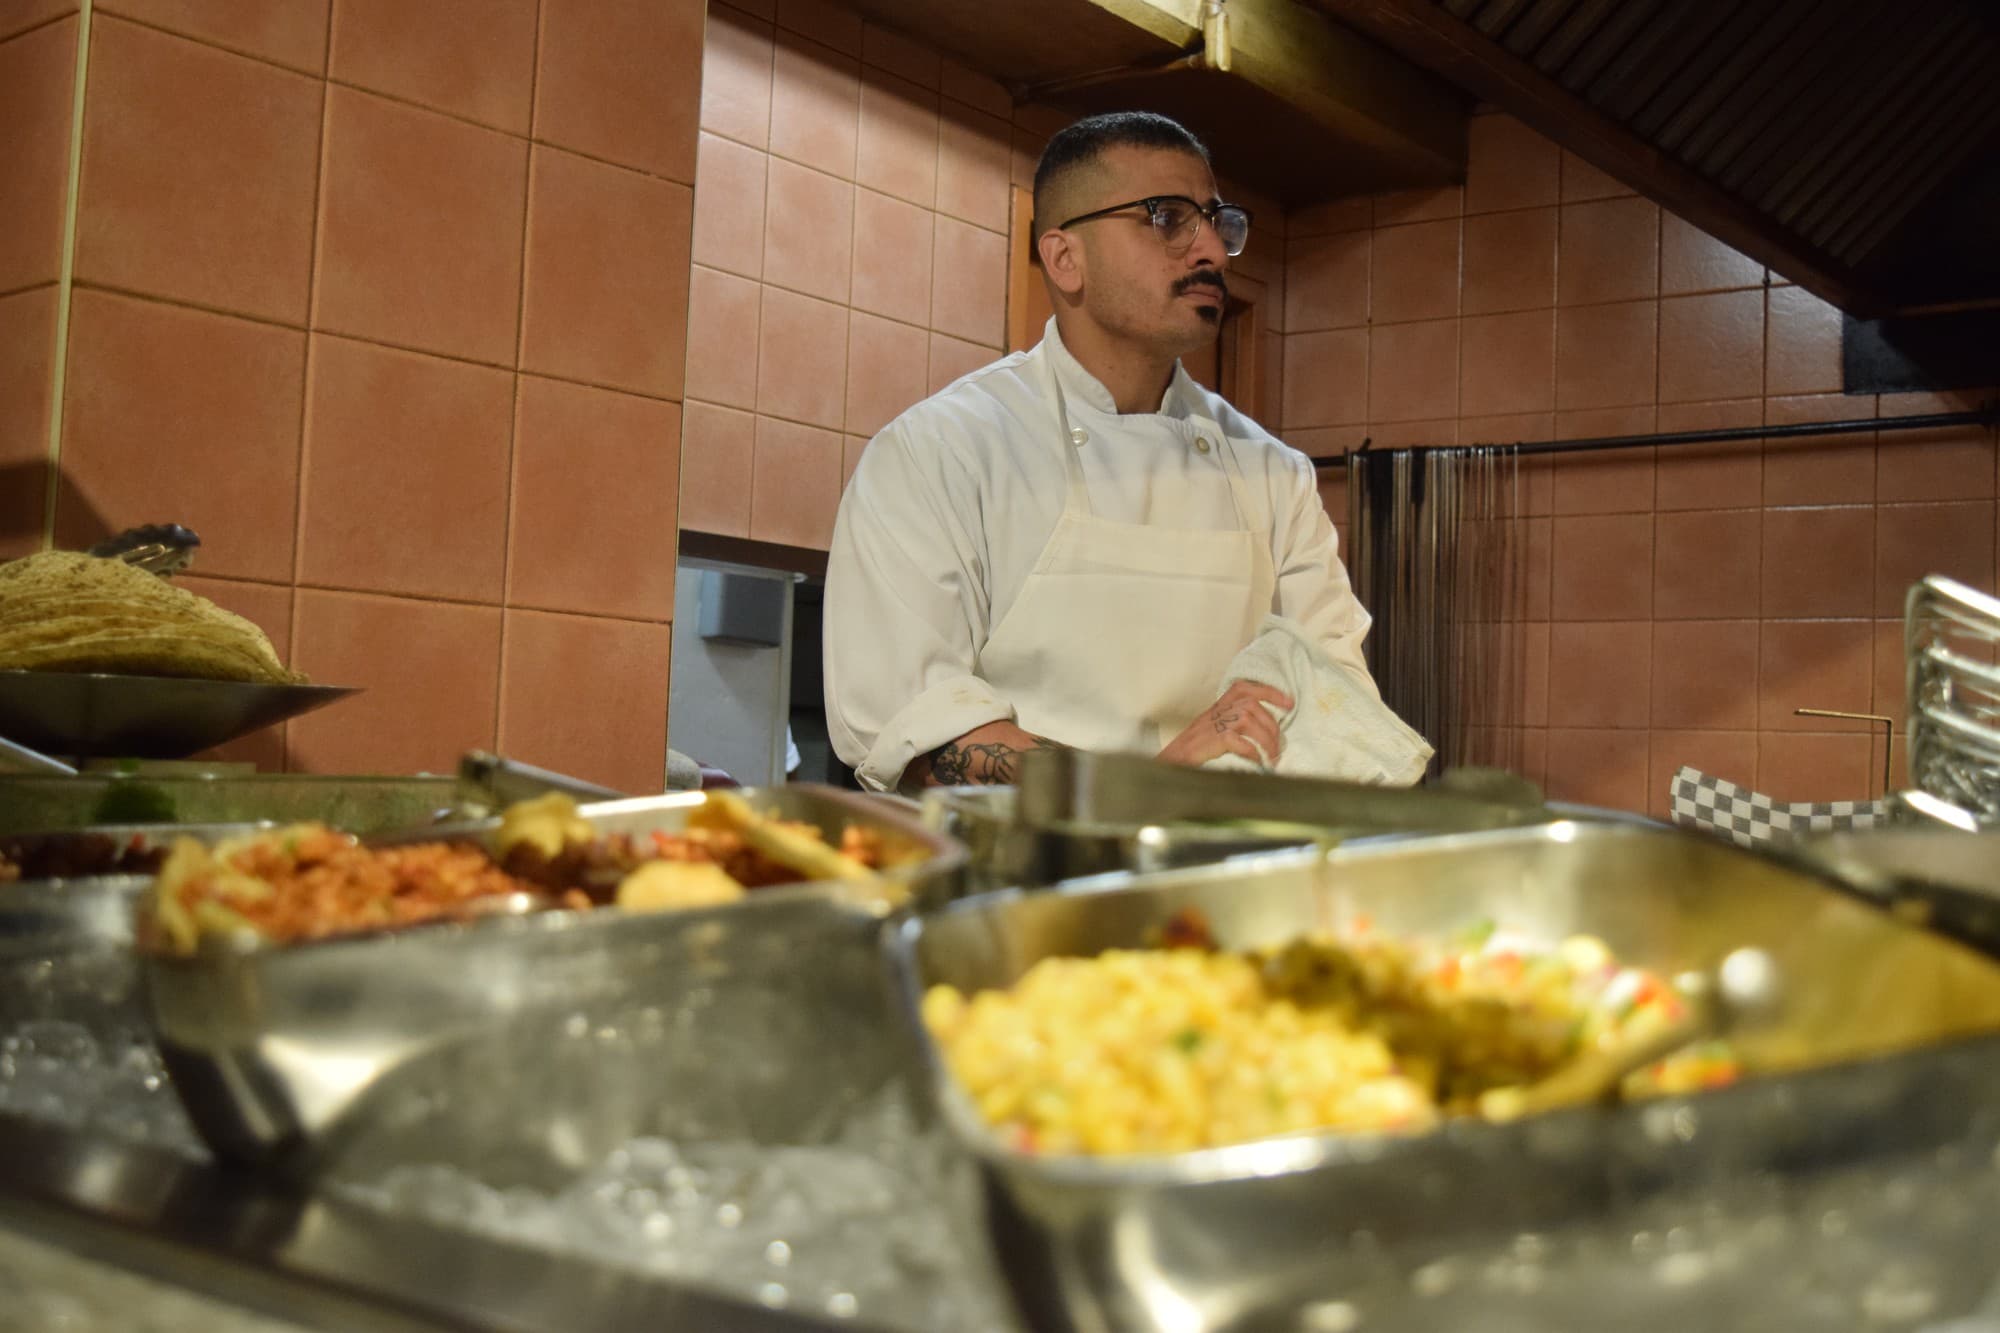 Nitin Mehra, 38, is the executive chef and COO of his family's restaurant, East India Company. Mehra is a recipient of this year's Forty Under 40 award.